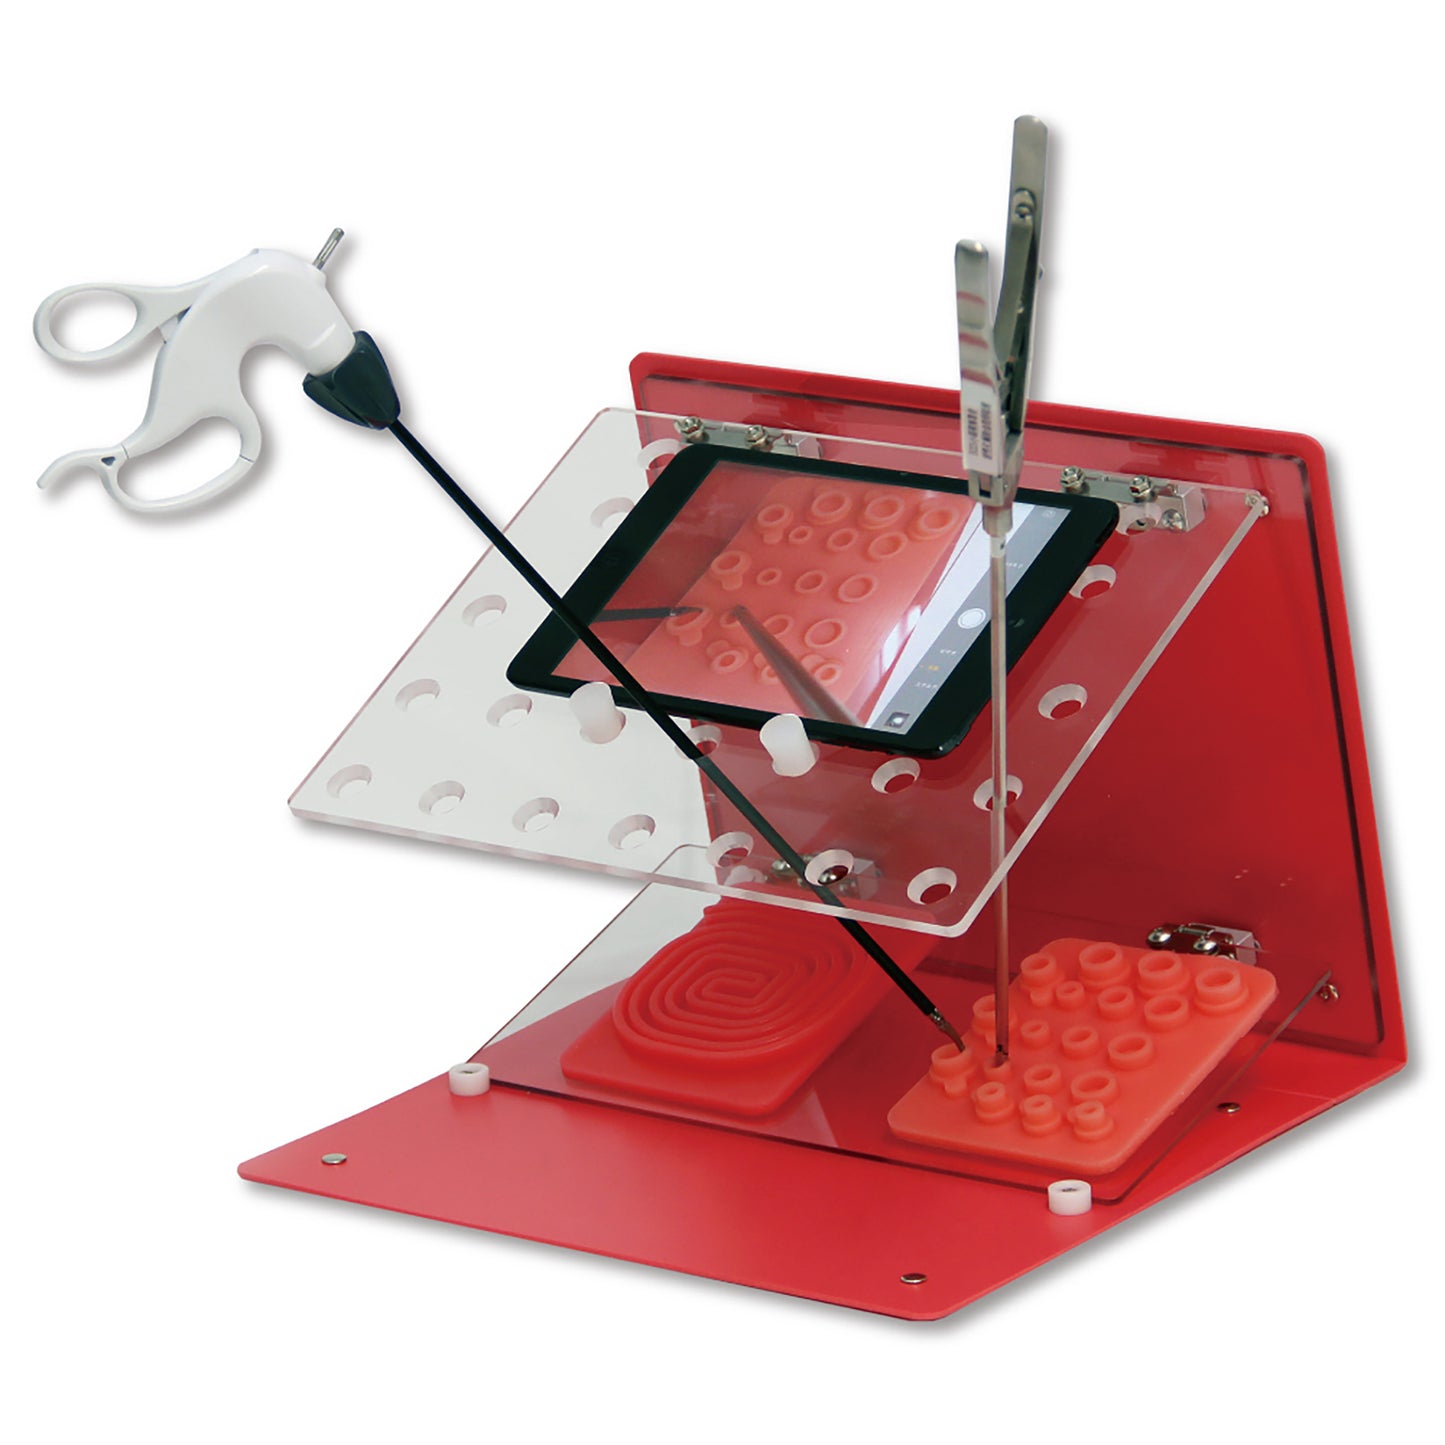 The Laparo Training Binder opened to its standing position. The red A4 binder is open and the clear laparoscopic wall has an iPad resting on top with its camera on. Two laparoscopic trocars are inserted into entry ports. A red silicon traning pad and a pink silicon training pad are being used to practice ligatures. 